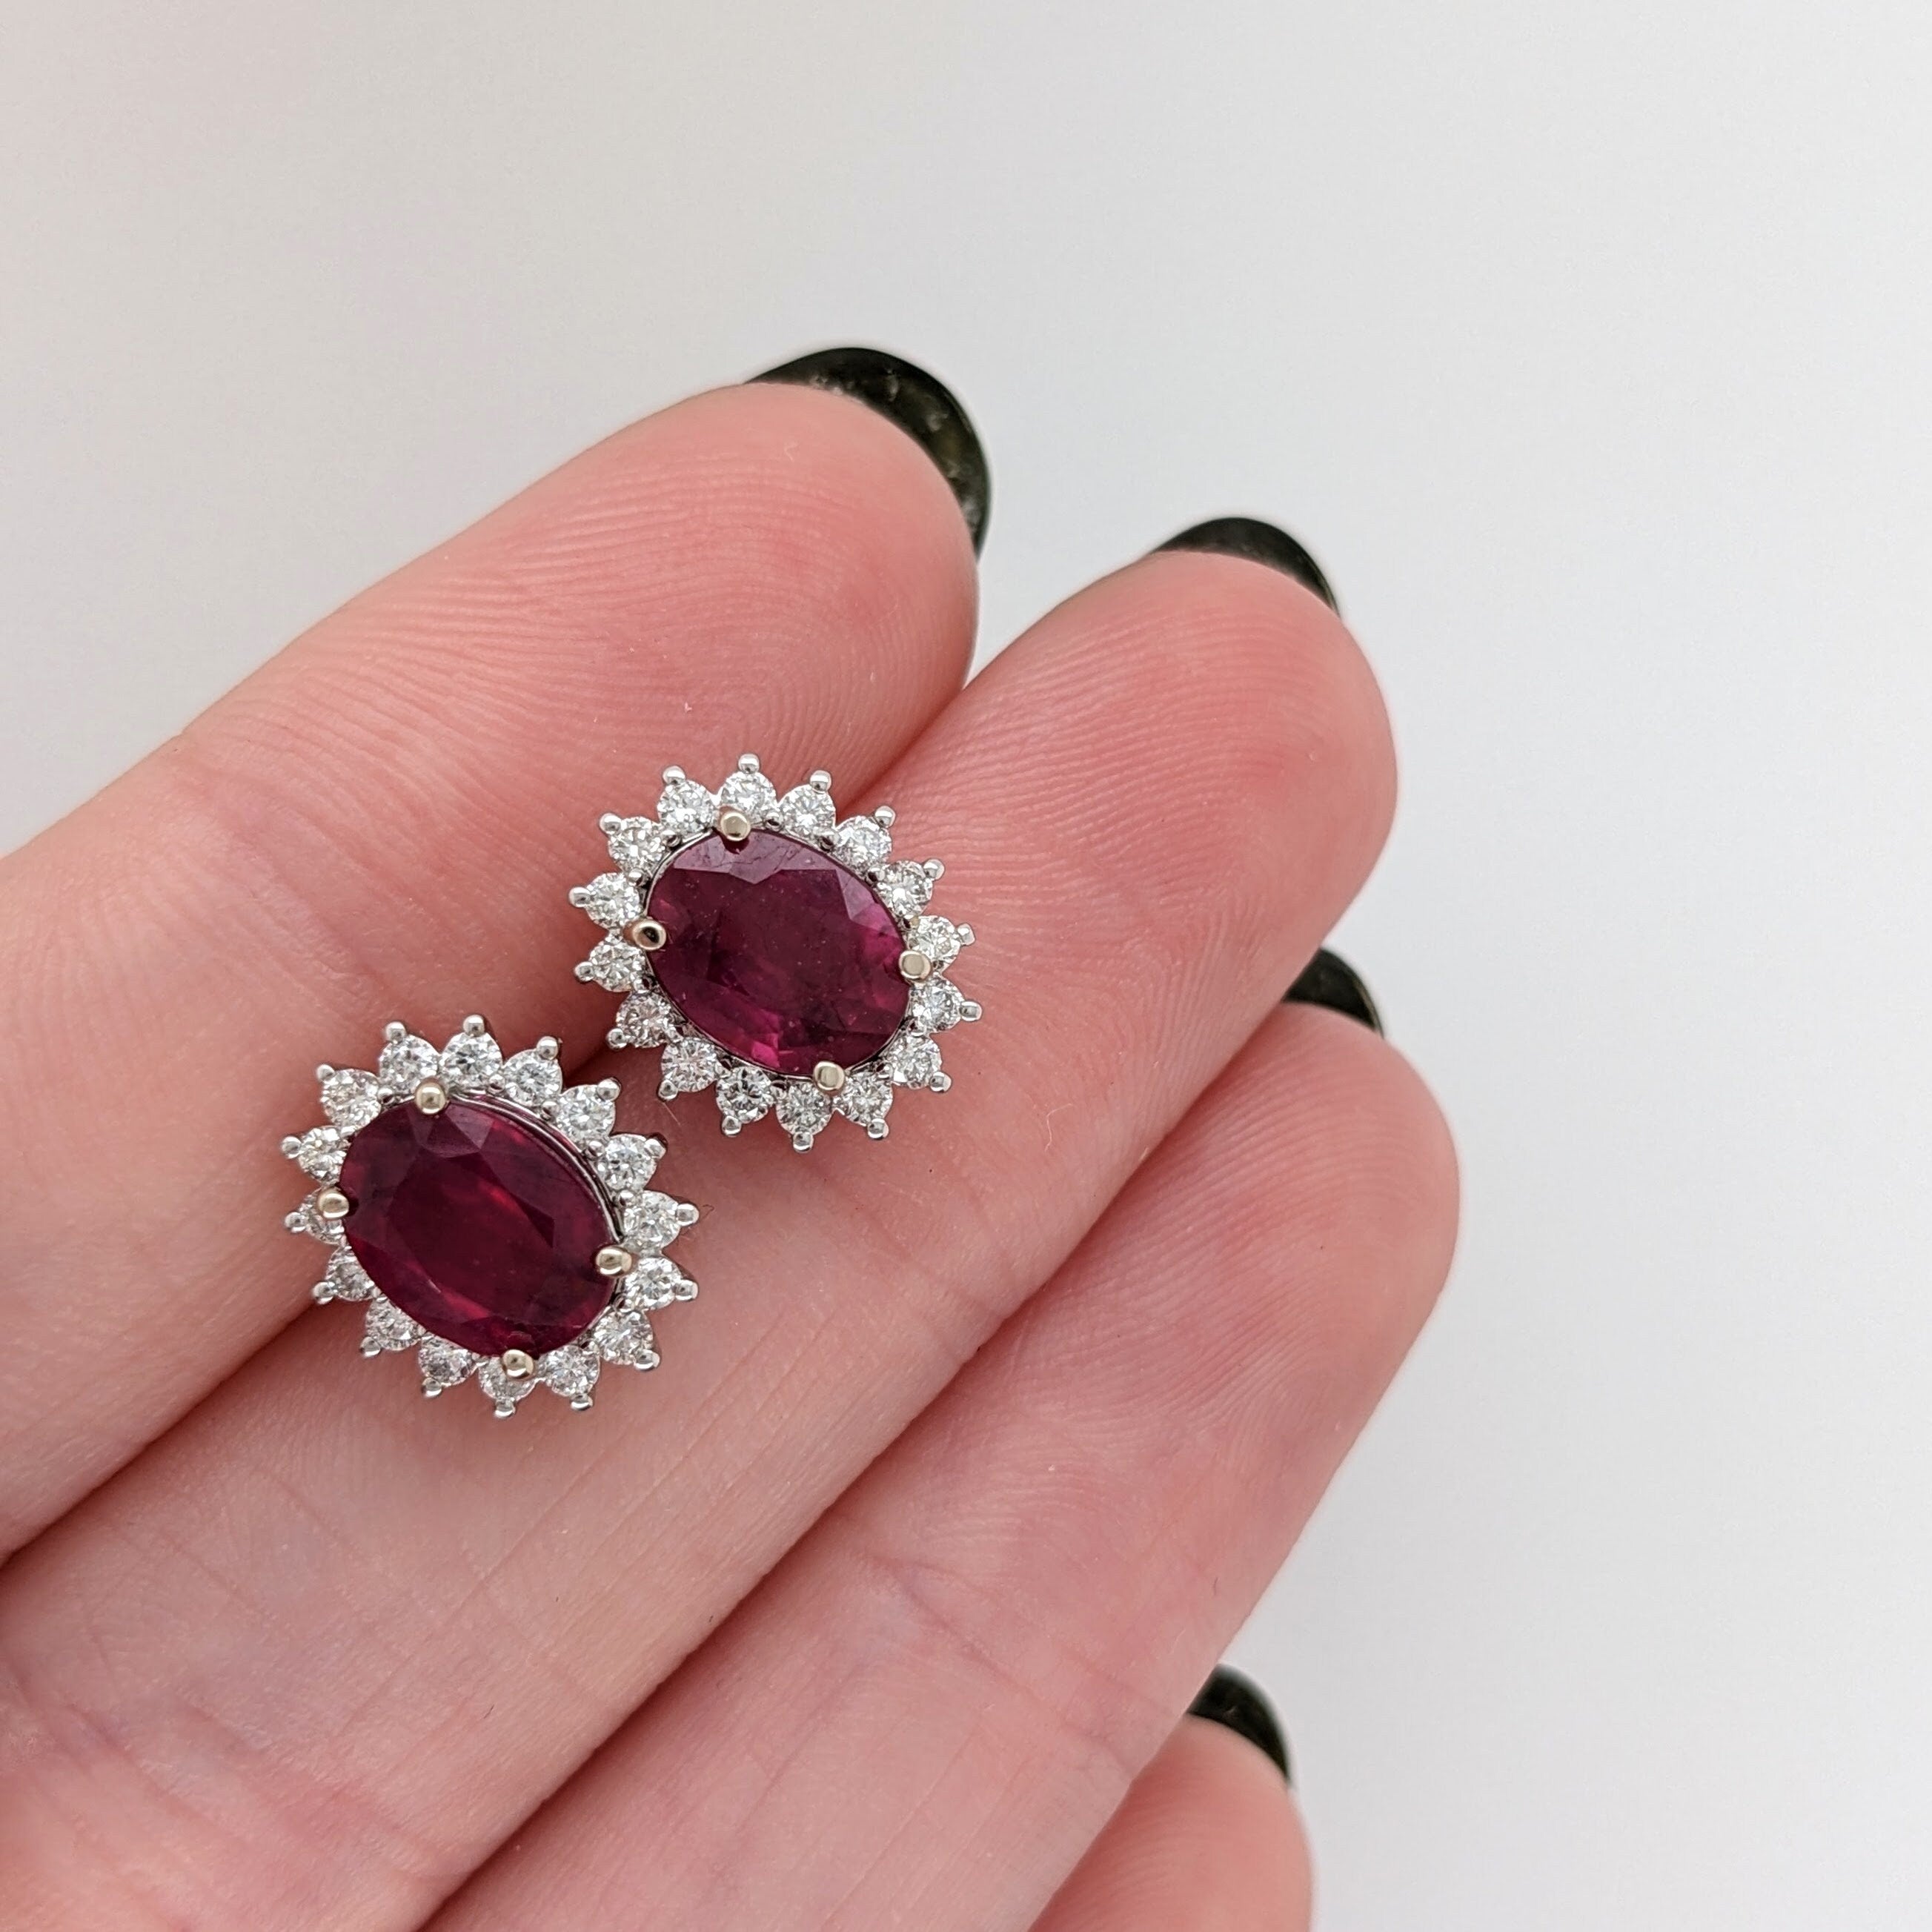 Starburst Red Ruby Studs in 14k Solid White Gold with Natural Diamond Accents || Oval 8x6mm || July Birthstone || Dainty Studs || Halo ||